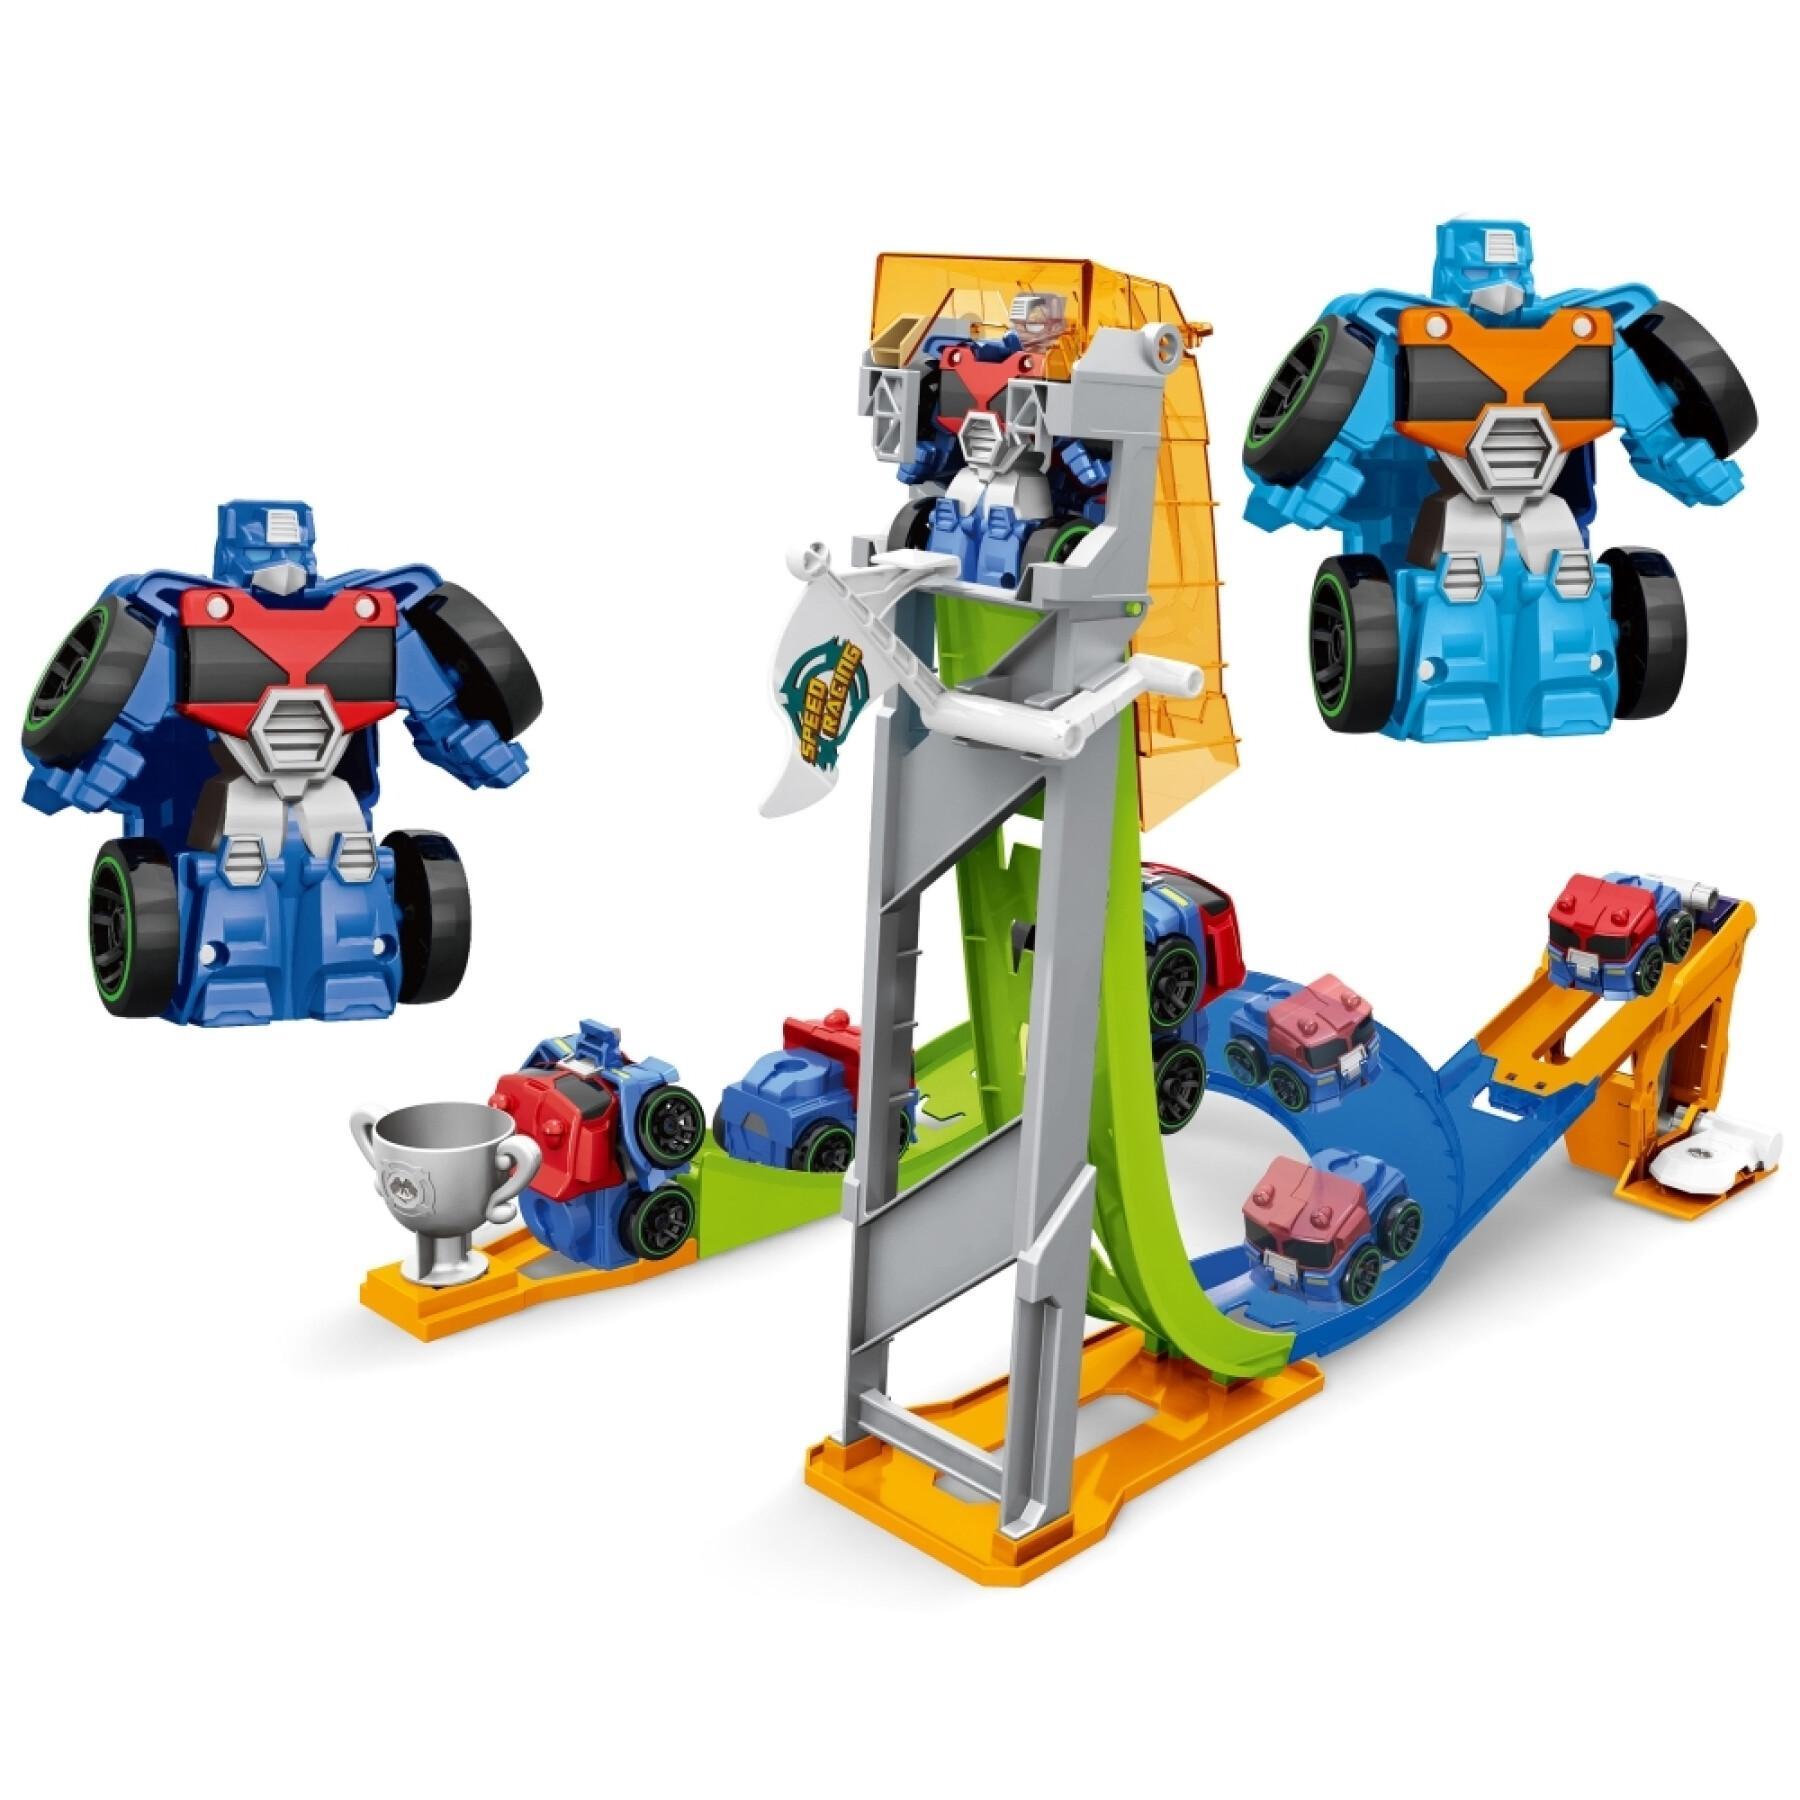 Robot track transformable 2 colors assorted Fantastiko